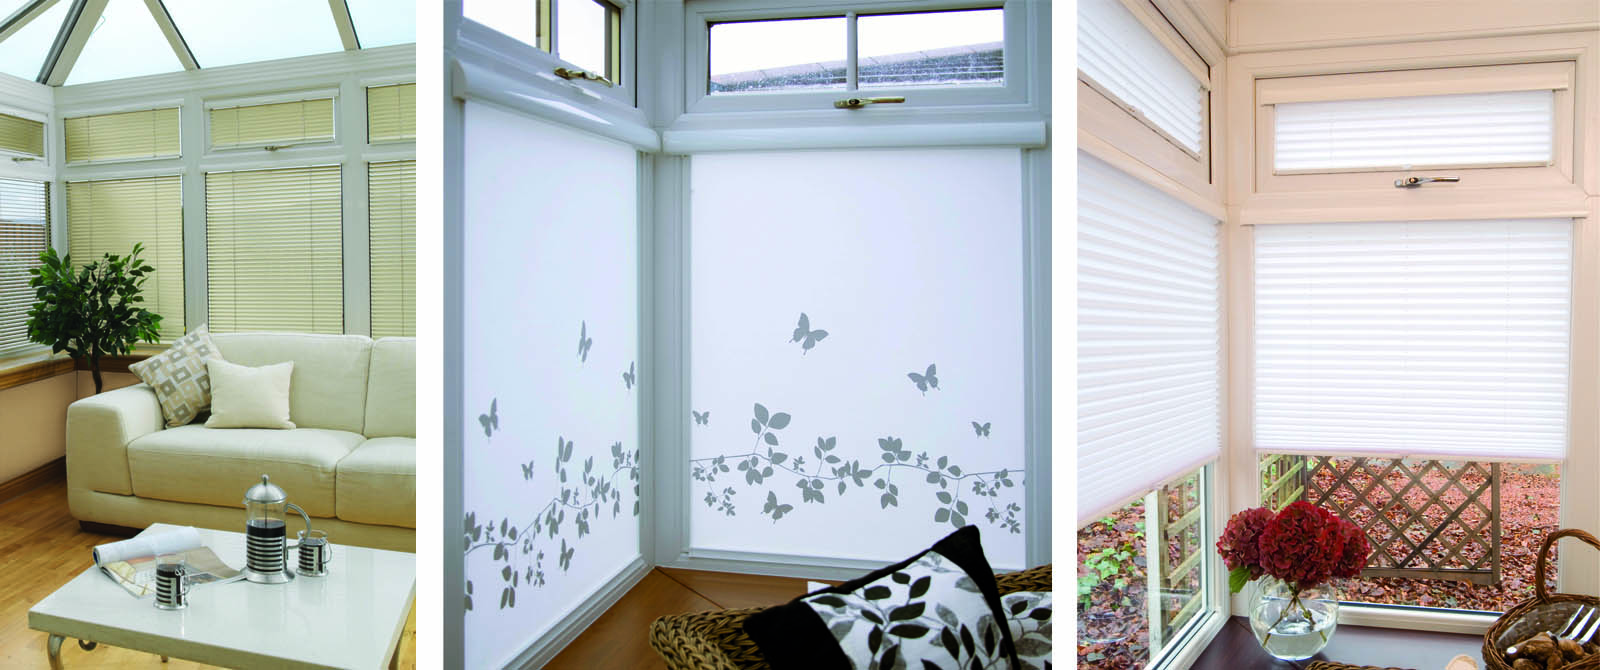 Conservatory Blinds from Blackmore Vale Blinds